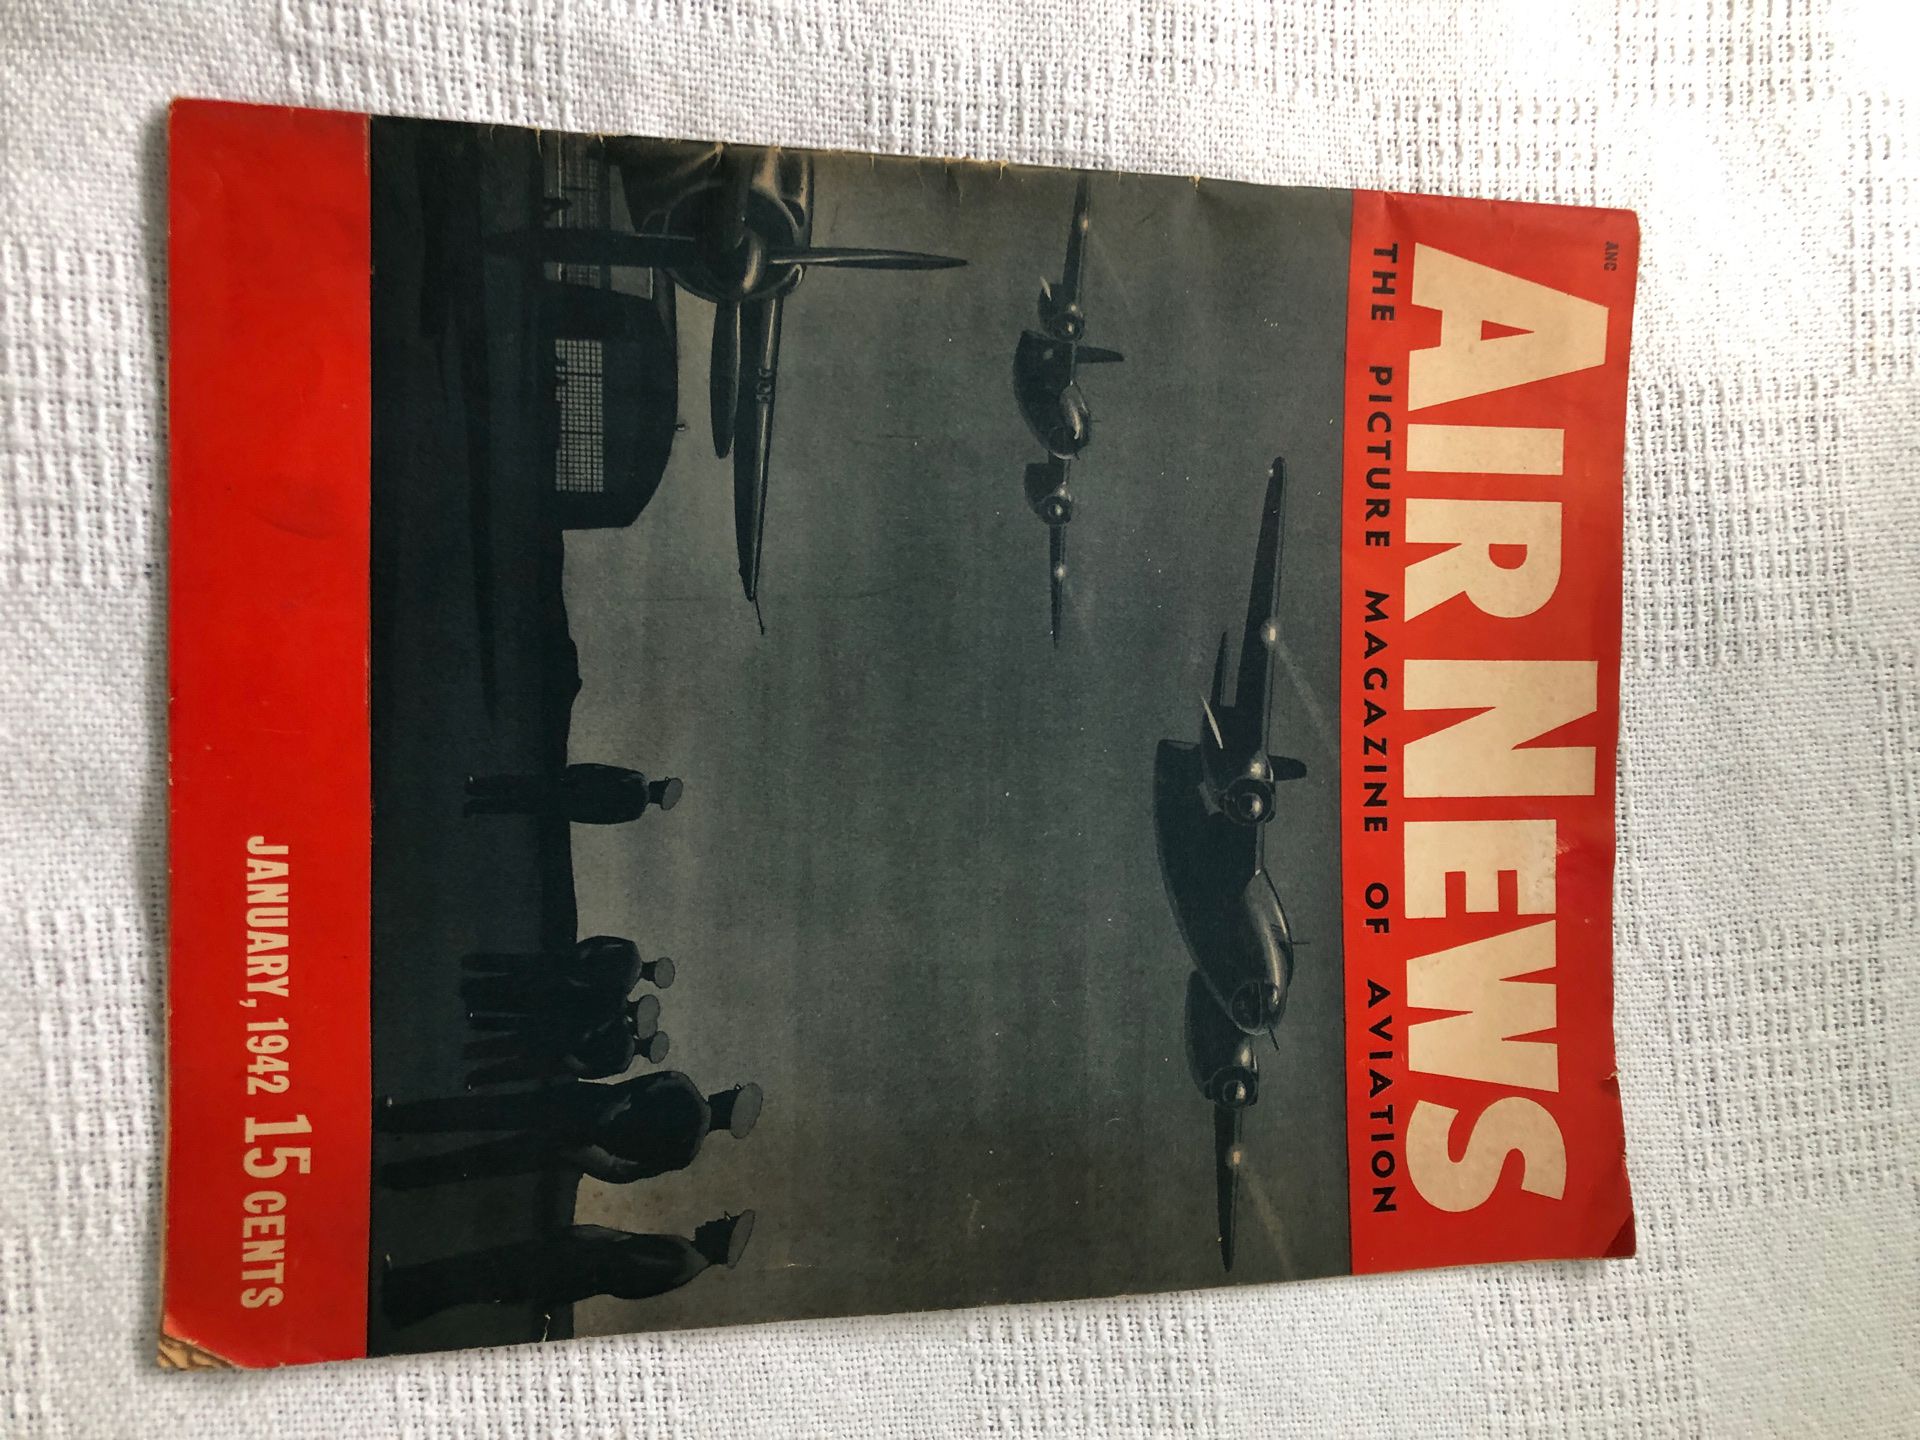 Air News 1942 pictures of aviation. Good condition. Has all pages